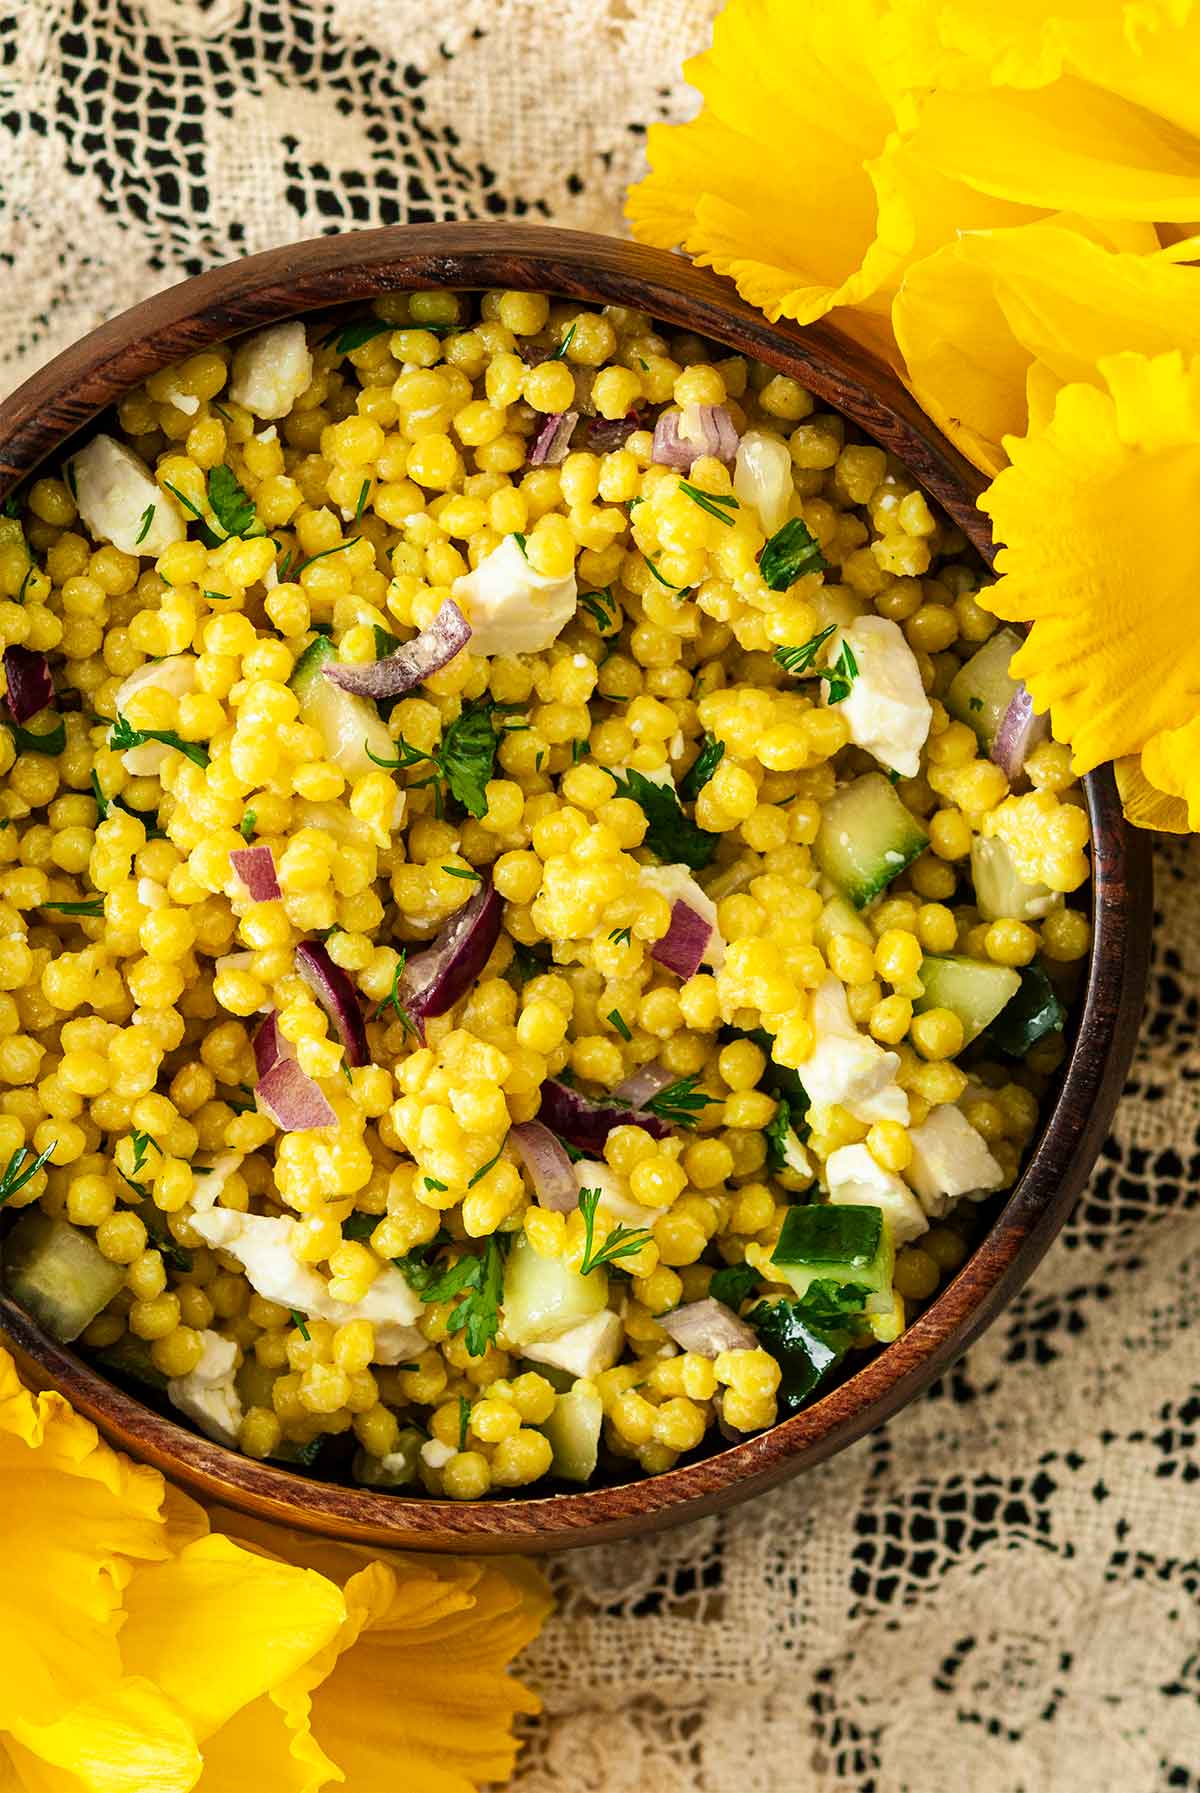 A wooden bowl of turmeric pearl couscous beside flowers on a lace tablecloth.